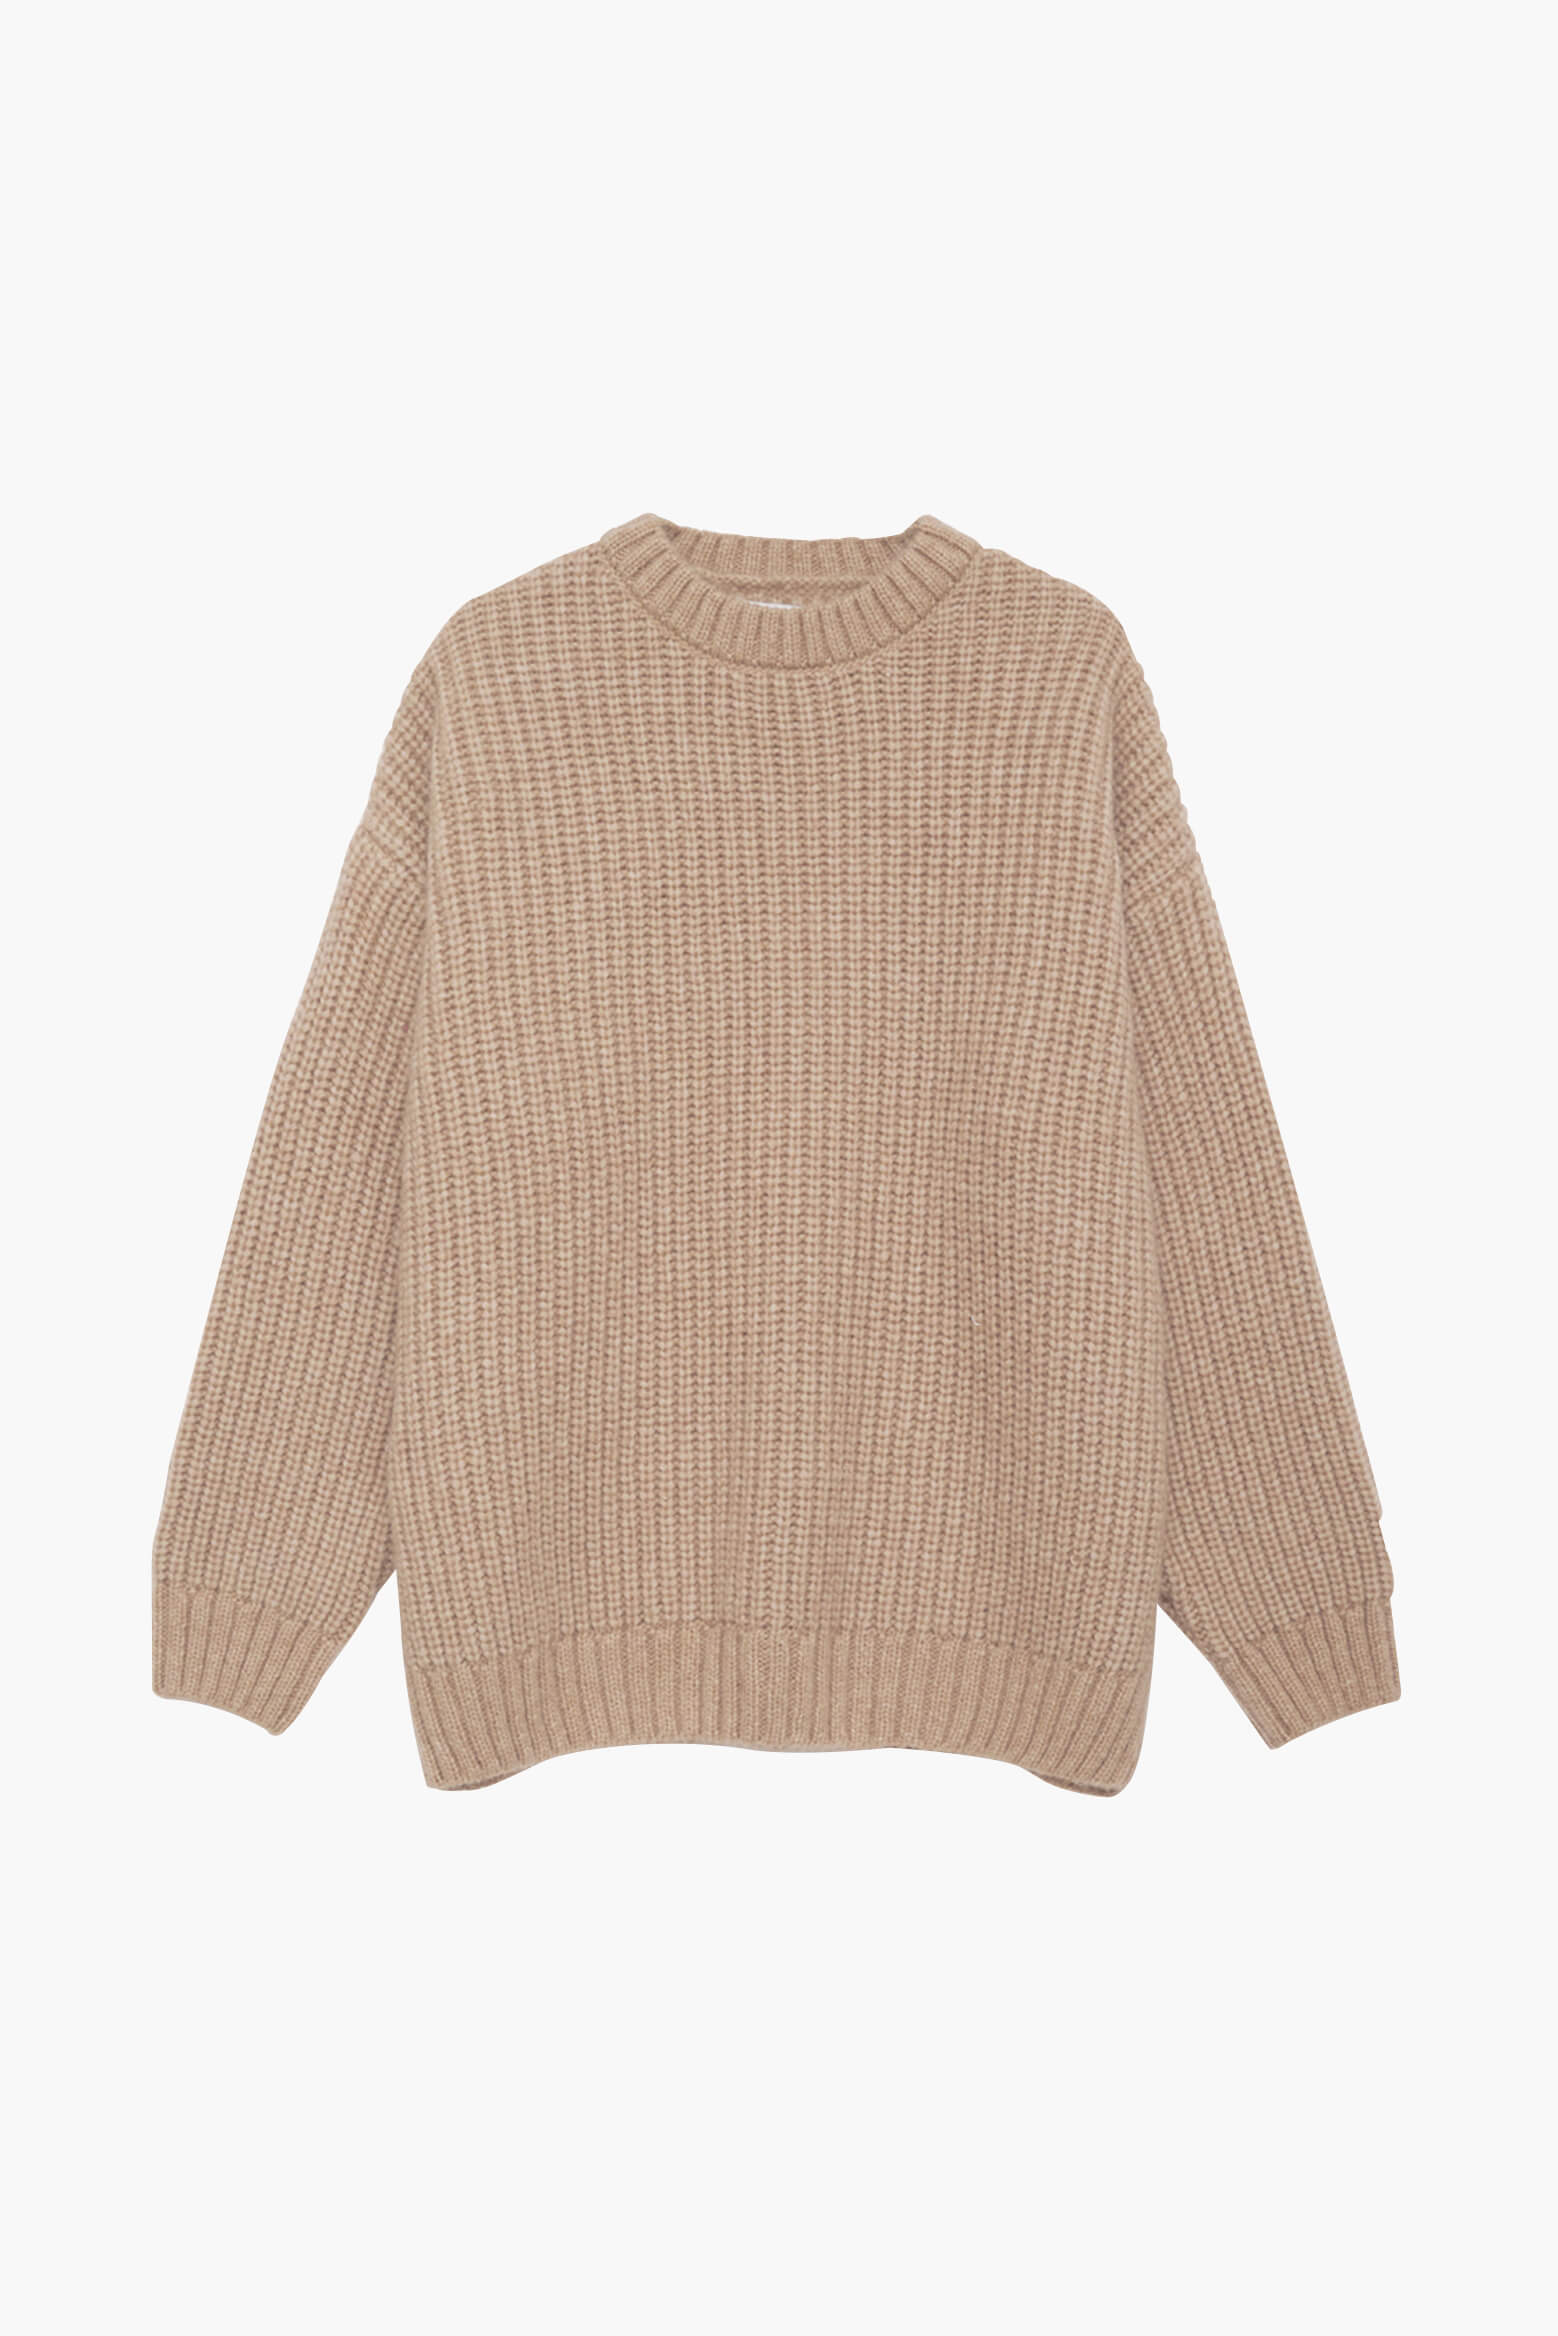 Anine Bing Sydney Crew Sweater in Camel available at TNT The New Trend